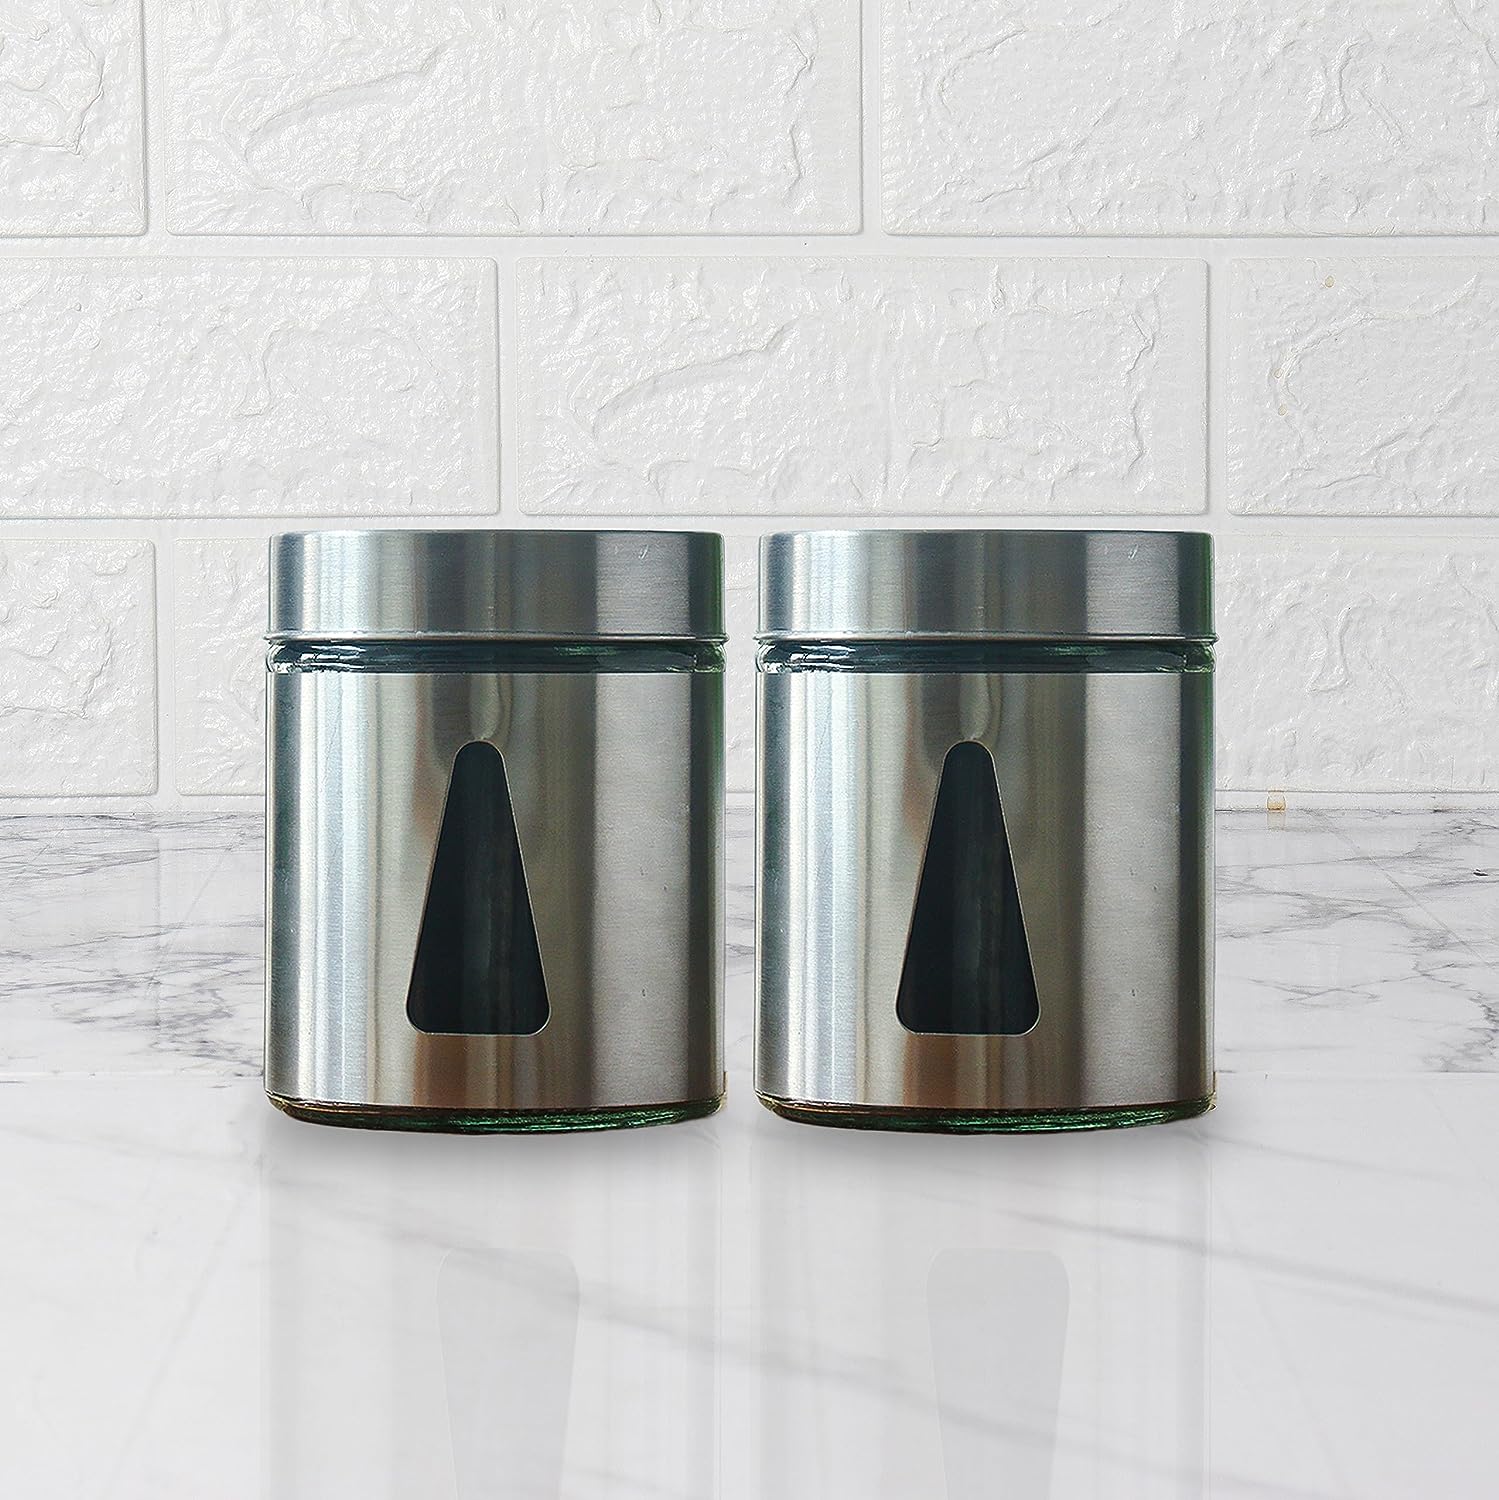 Femora Steel Jar for Kitchen Storage with Triangle Glass Window and Stainless Steel Cover, 1300 ml, Set Of 2, Free Replacement of Lids